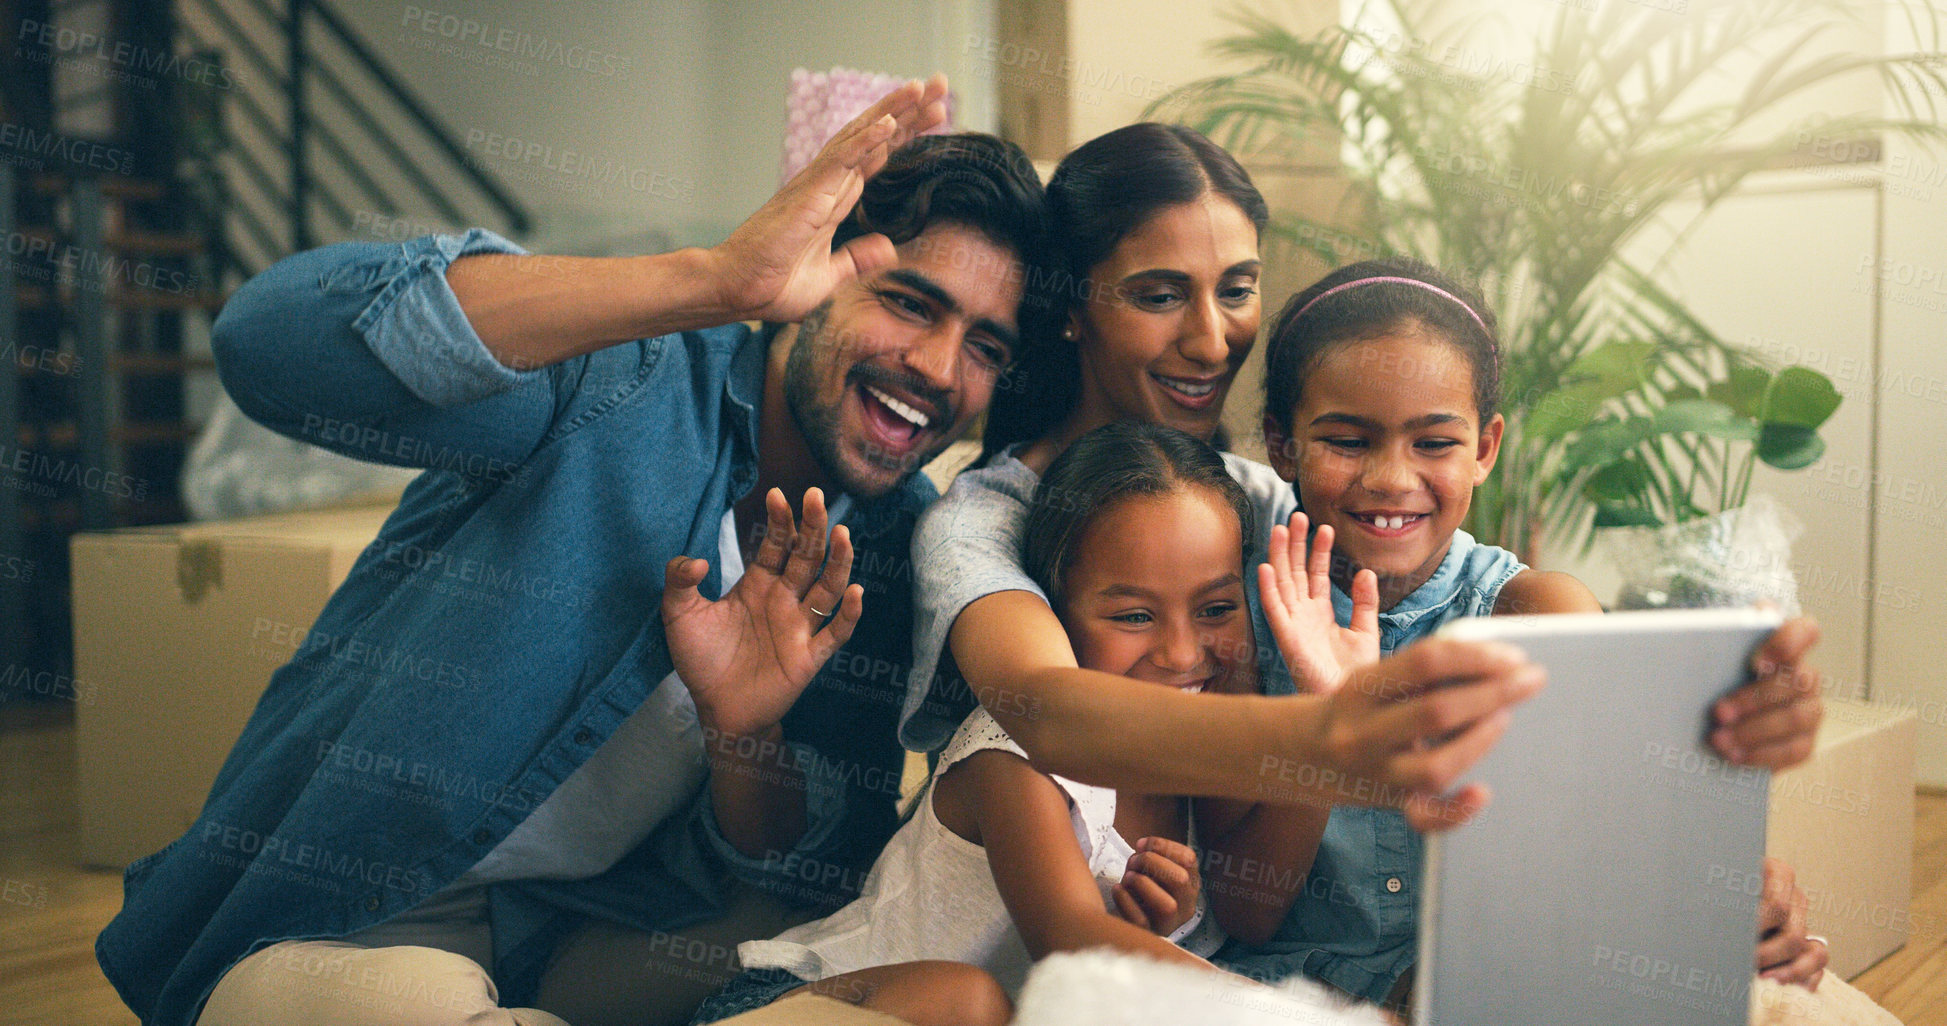 Buy stock photo Cropped shot of a young family making a video call on a tablet at home